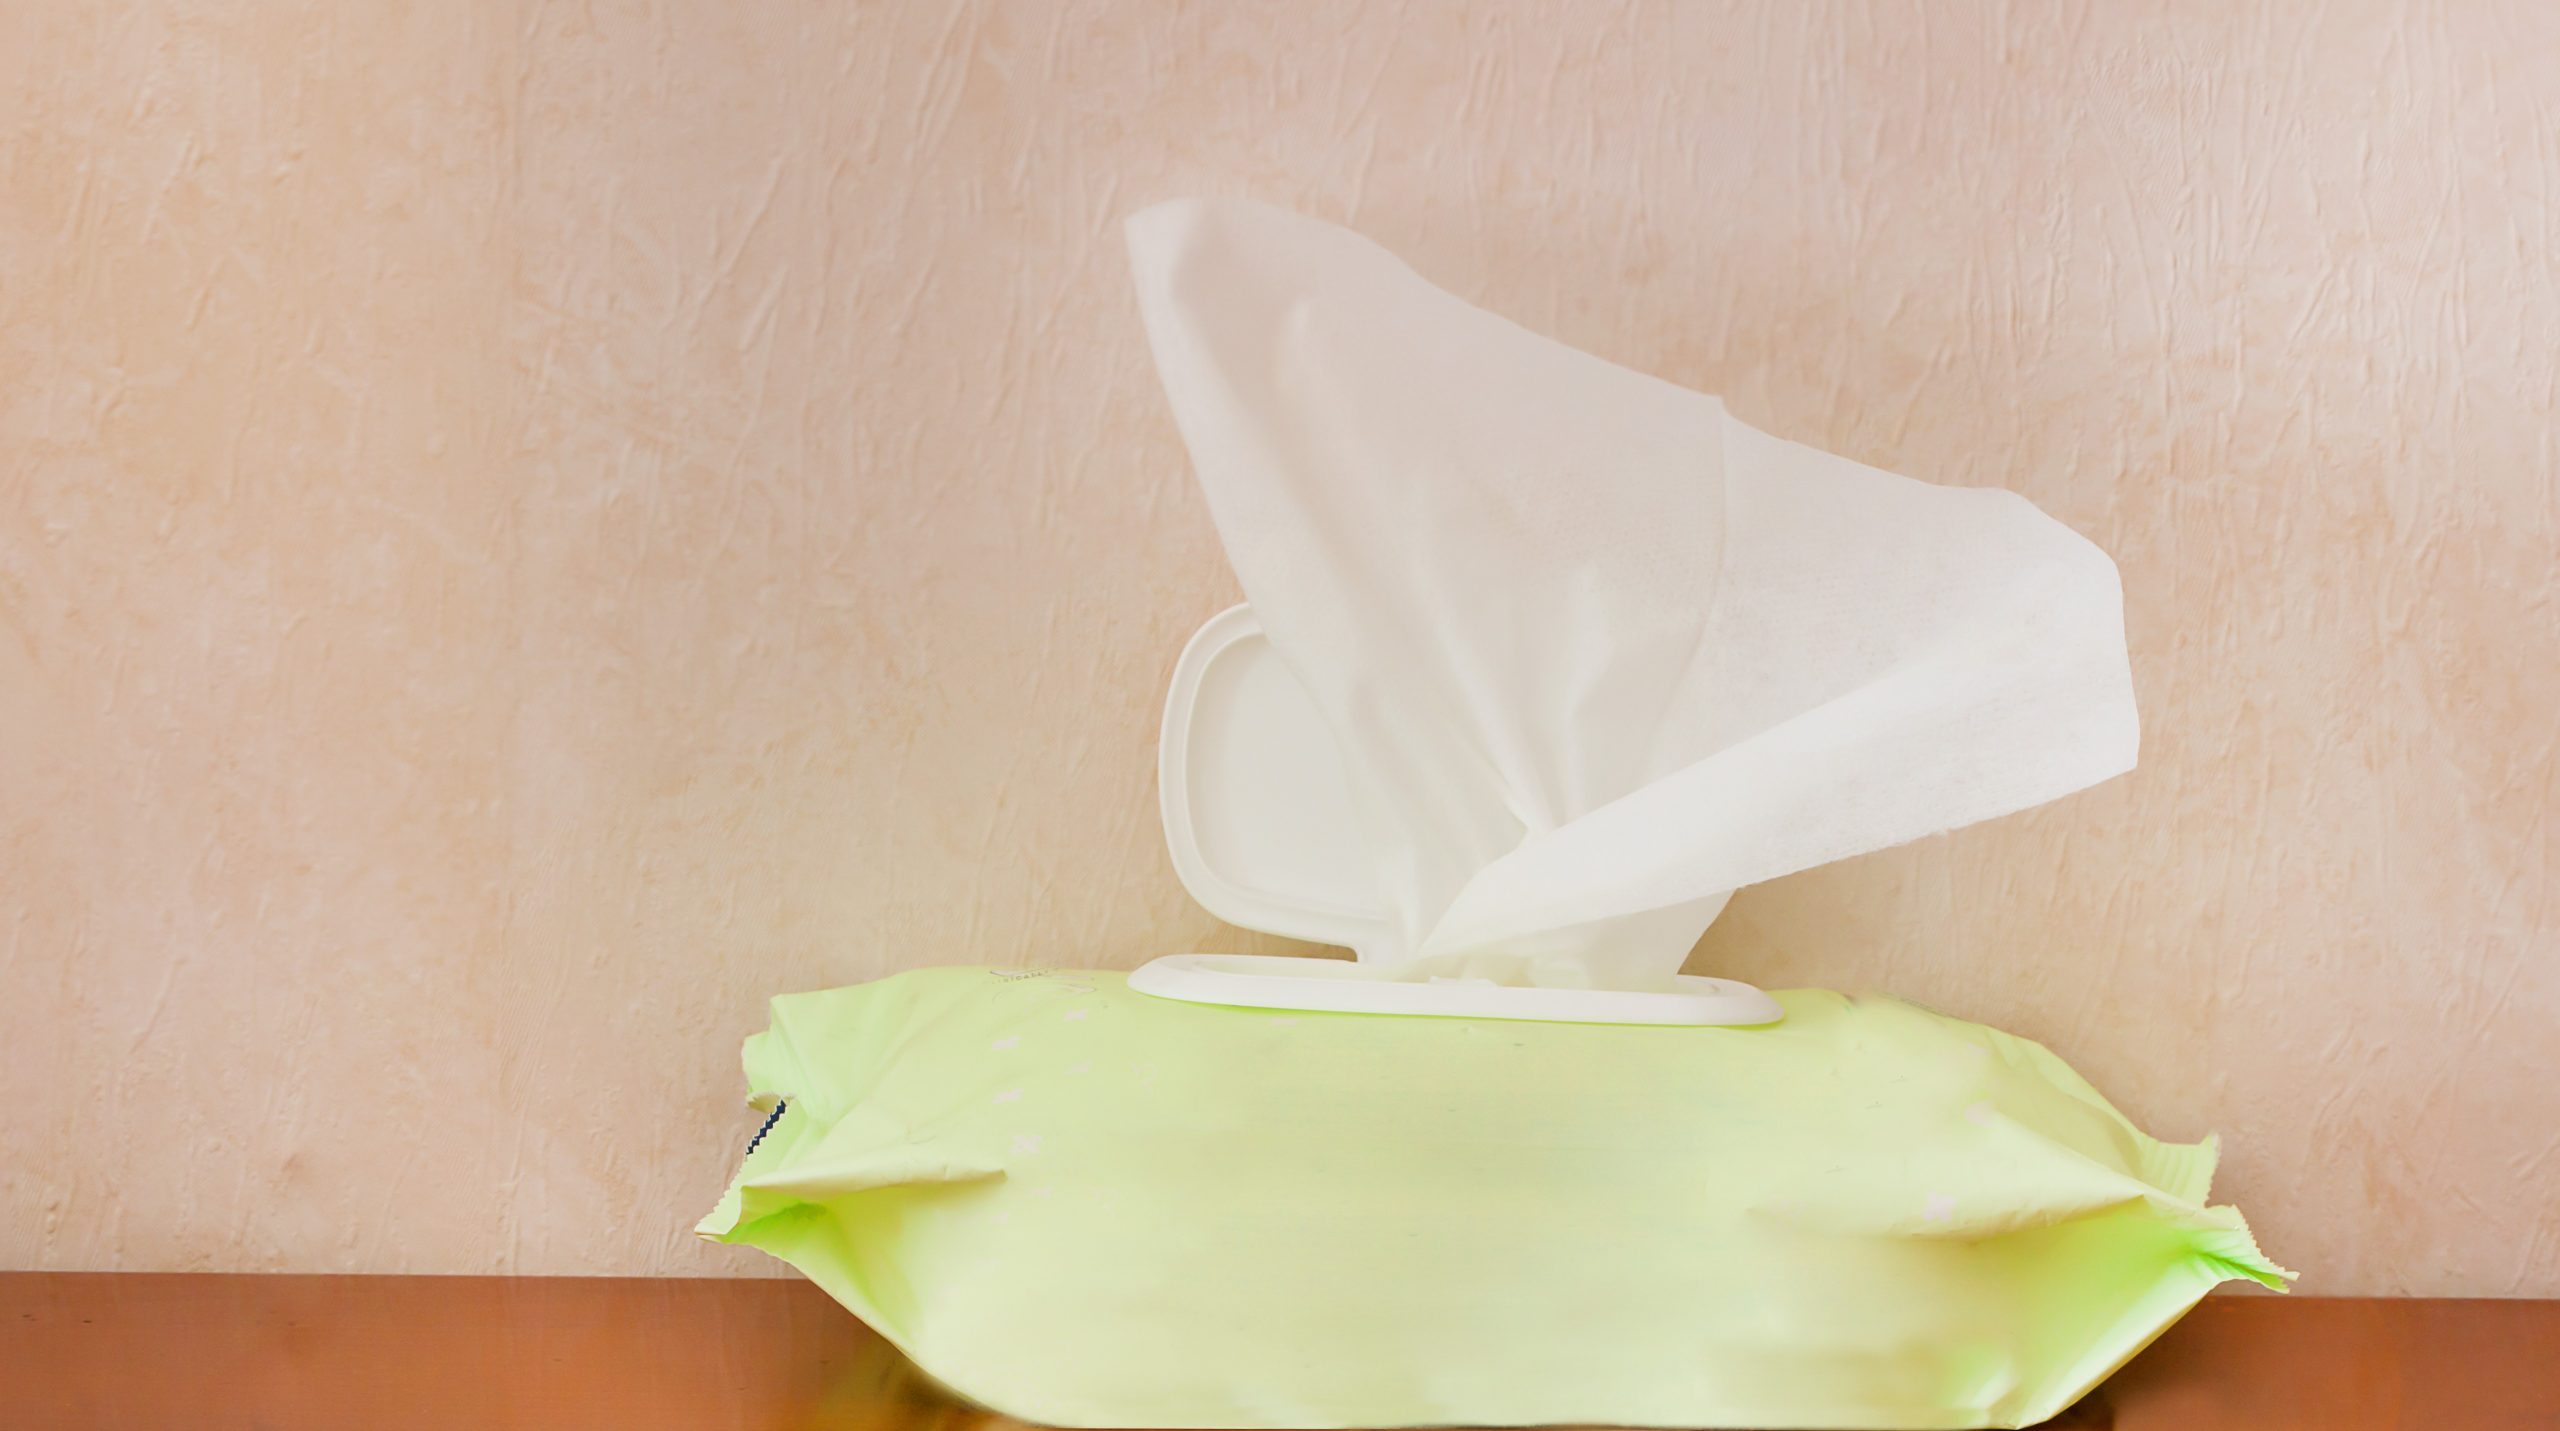 Extraordinary Uses for Baby Wipes | Reader's Digest